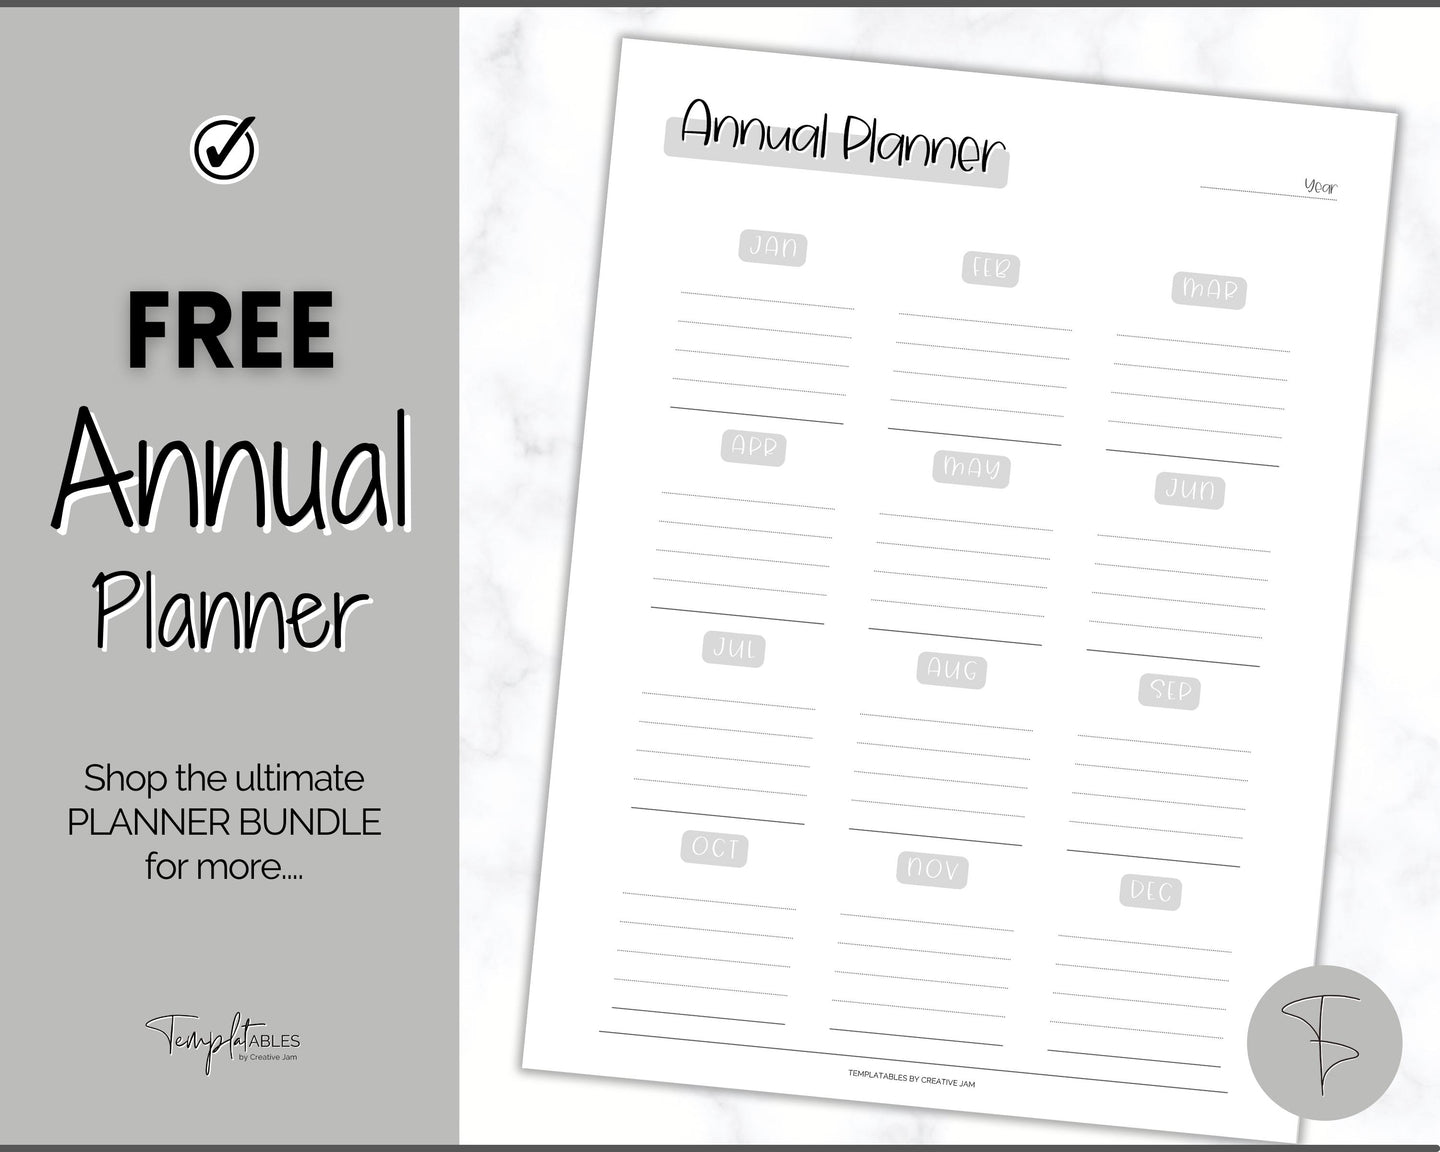 FREE - Annual Planner Printable, Annual Calendar, To Do List Printable, Undated Schedule, Productivity Template | Mono